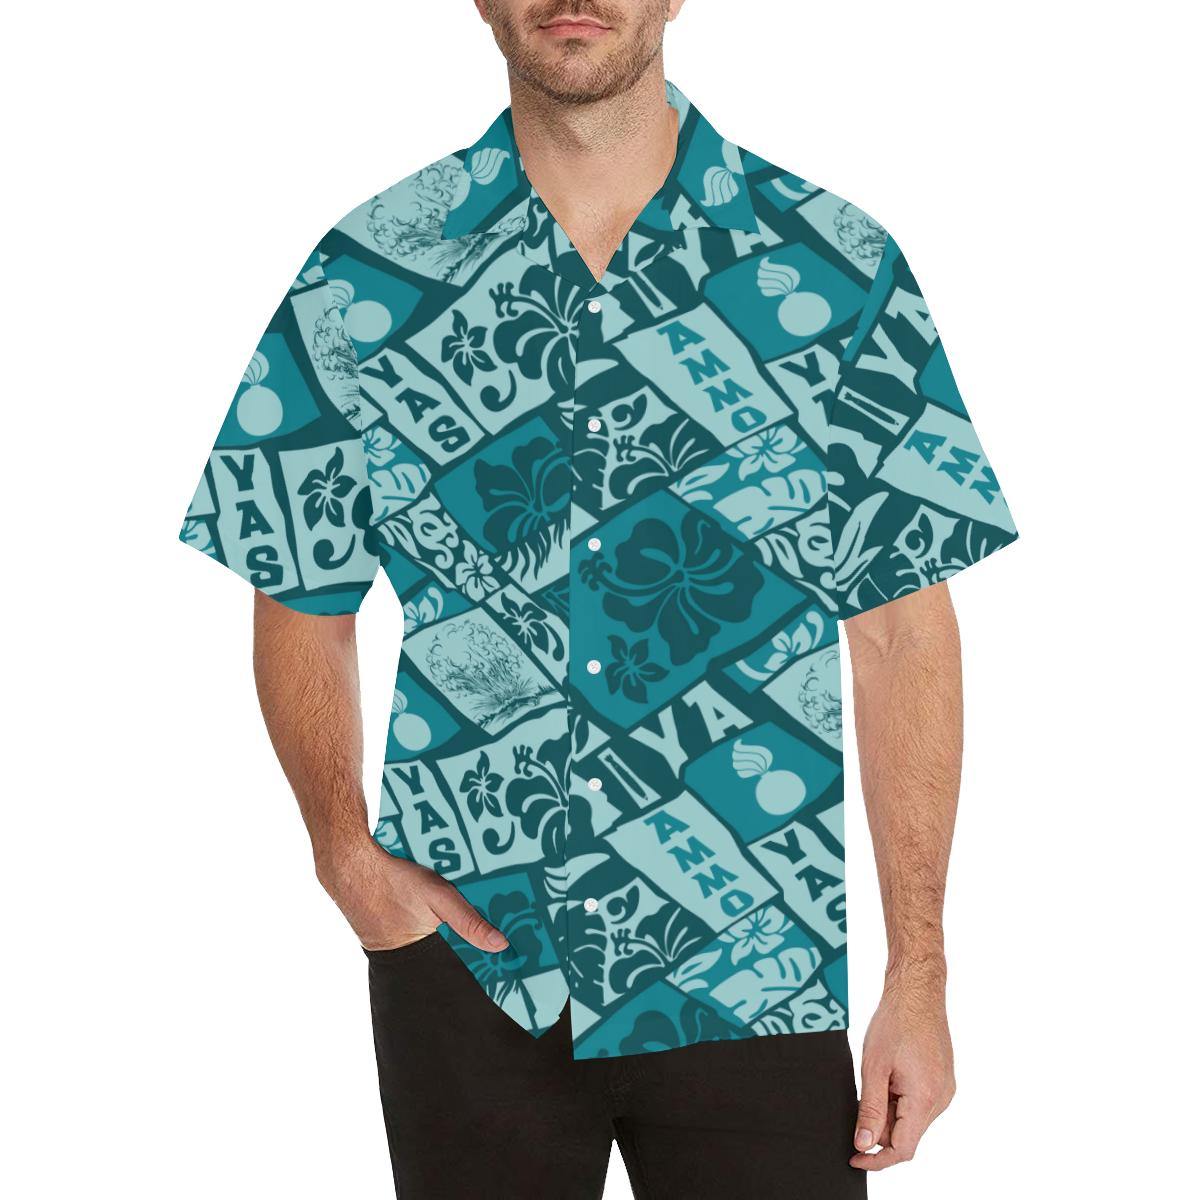 AMMO Hawaiian Shirt Green with White Hibiscus Flowers Pisspots and